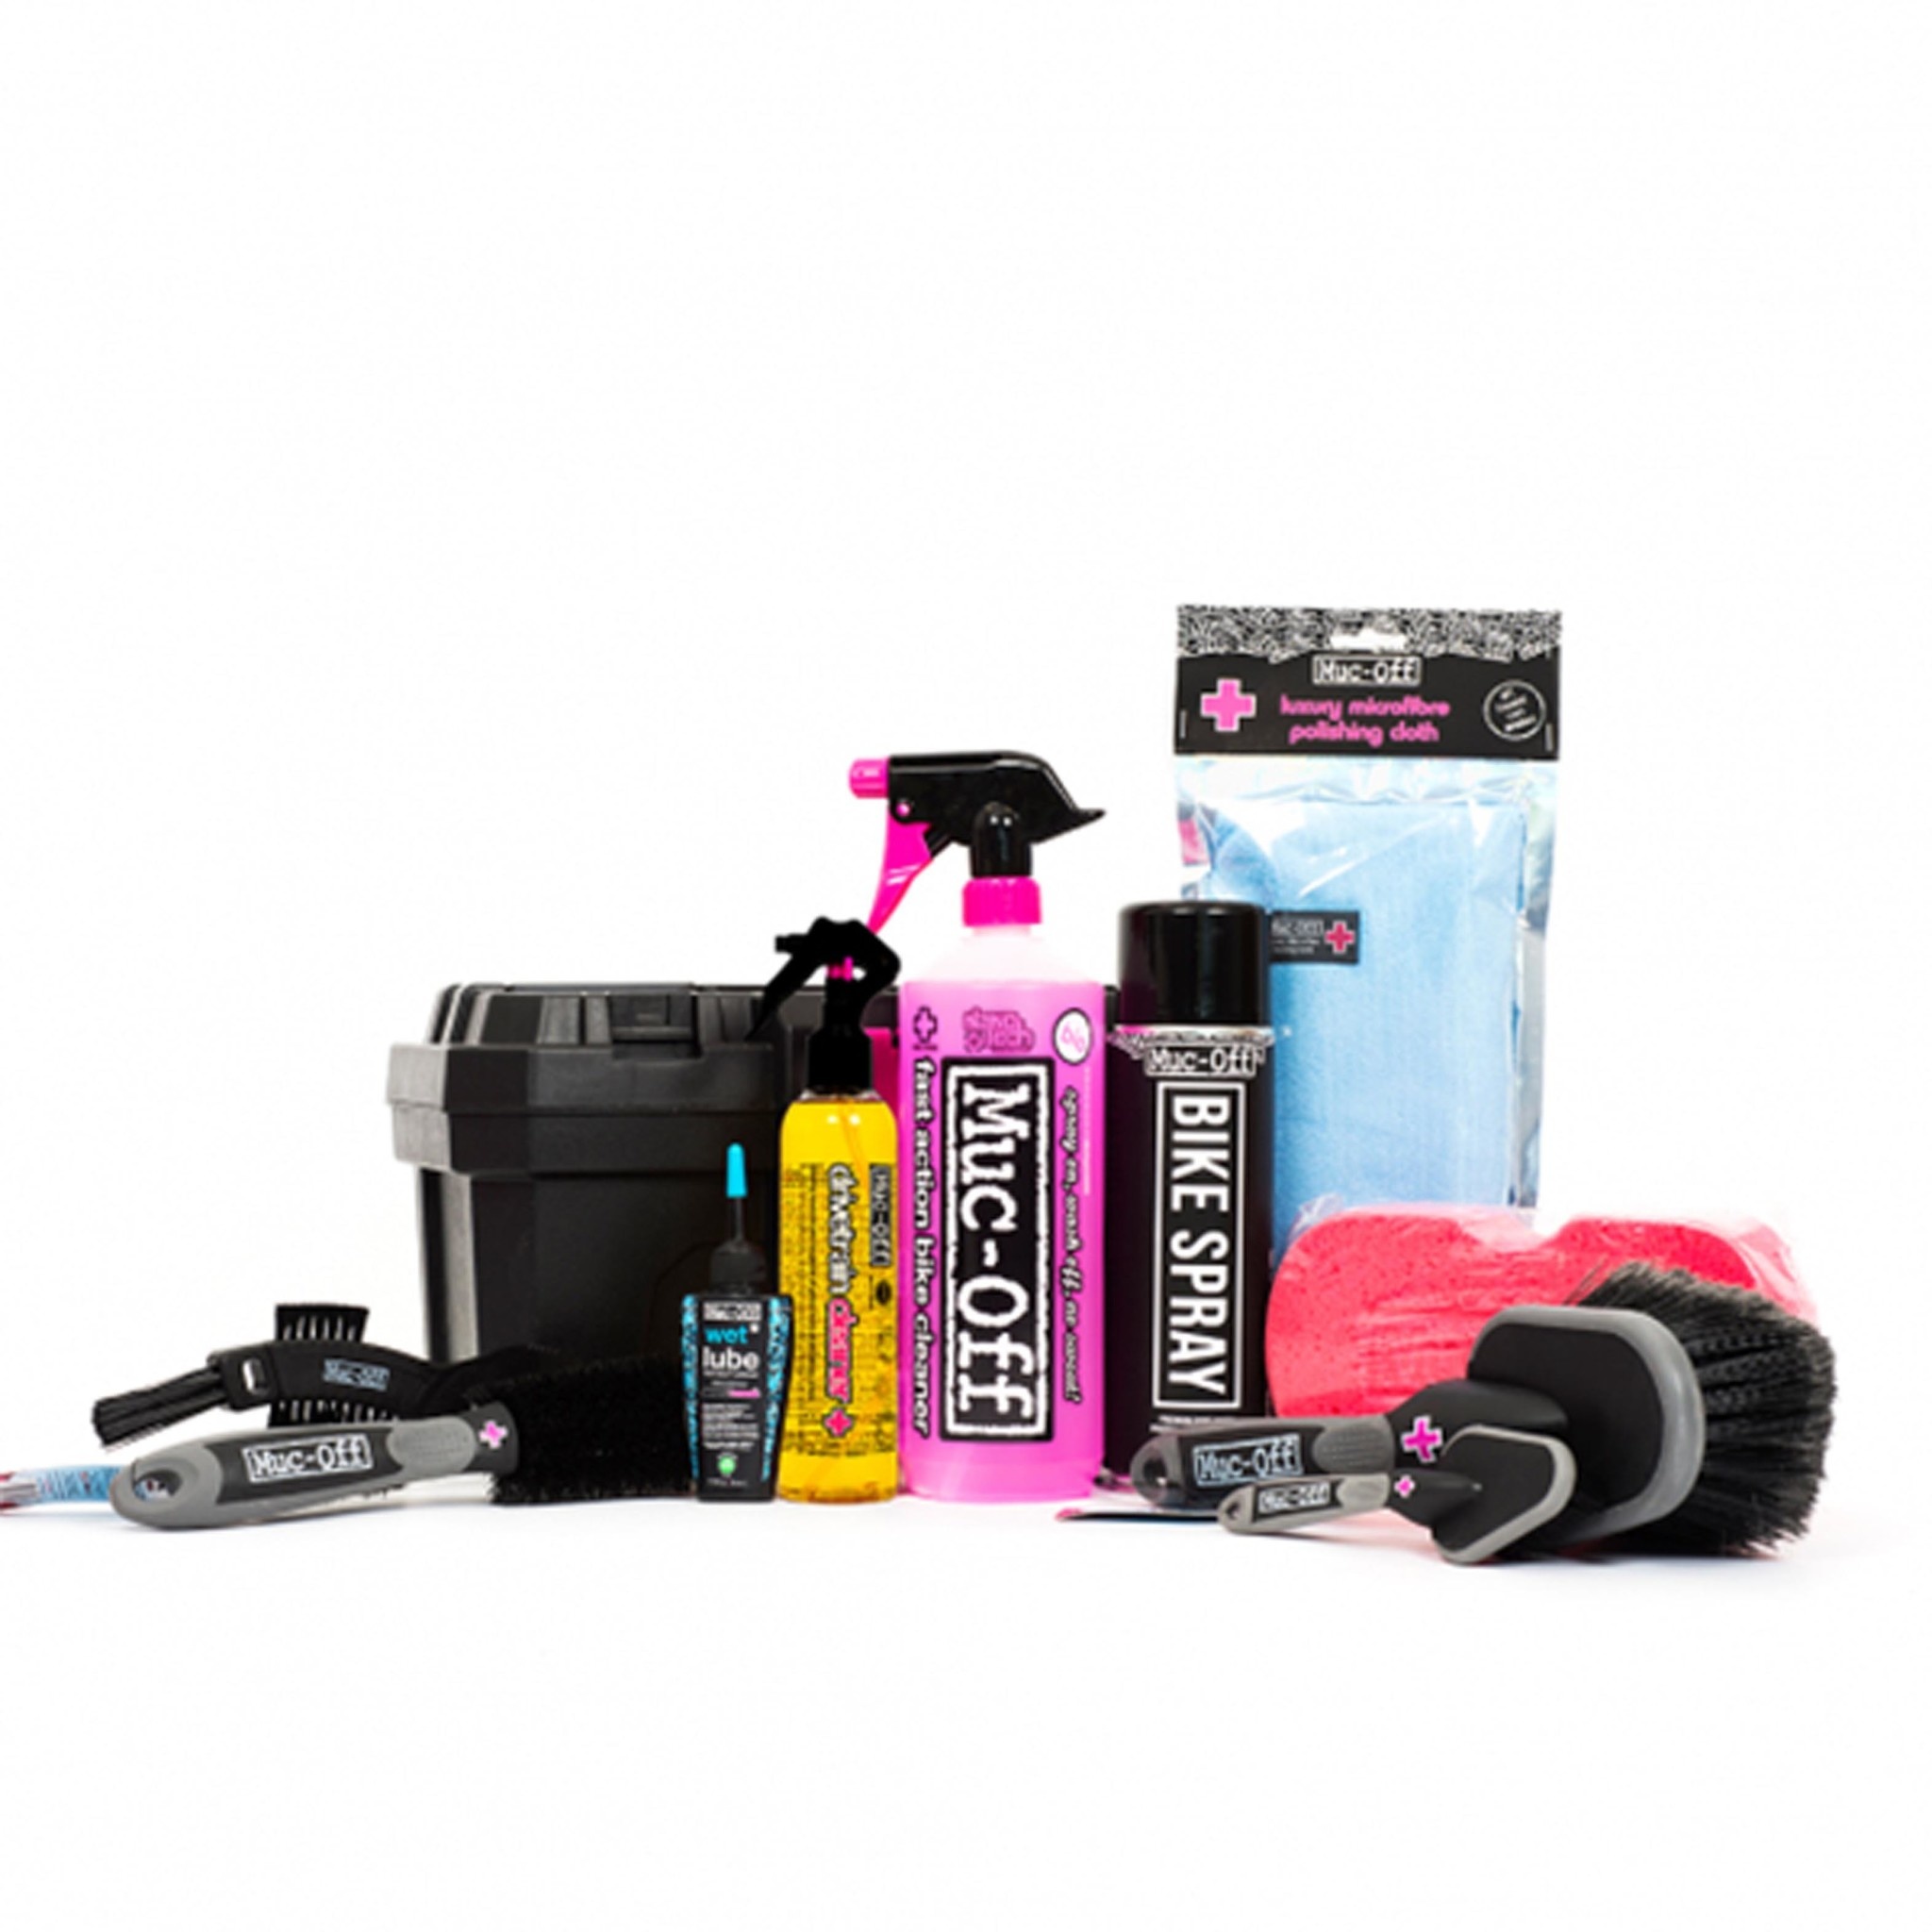 E-Bike Ultimate Clean Protect and Lube Kit MUC-OFF Care and Maintenan